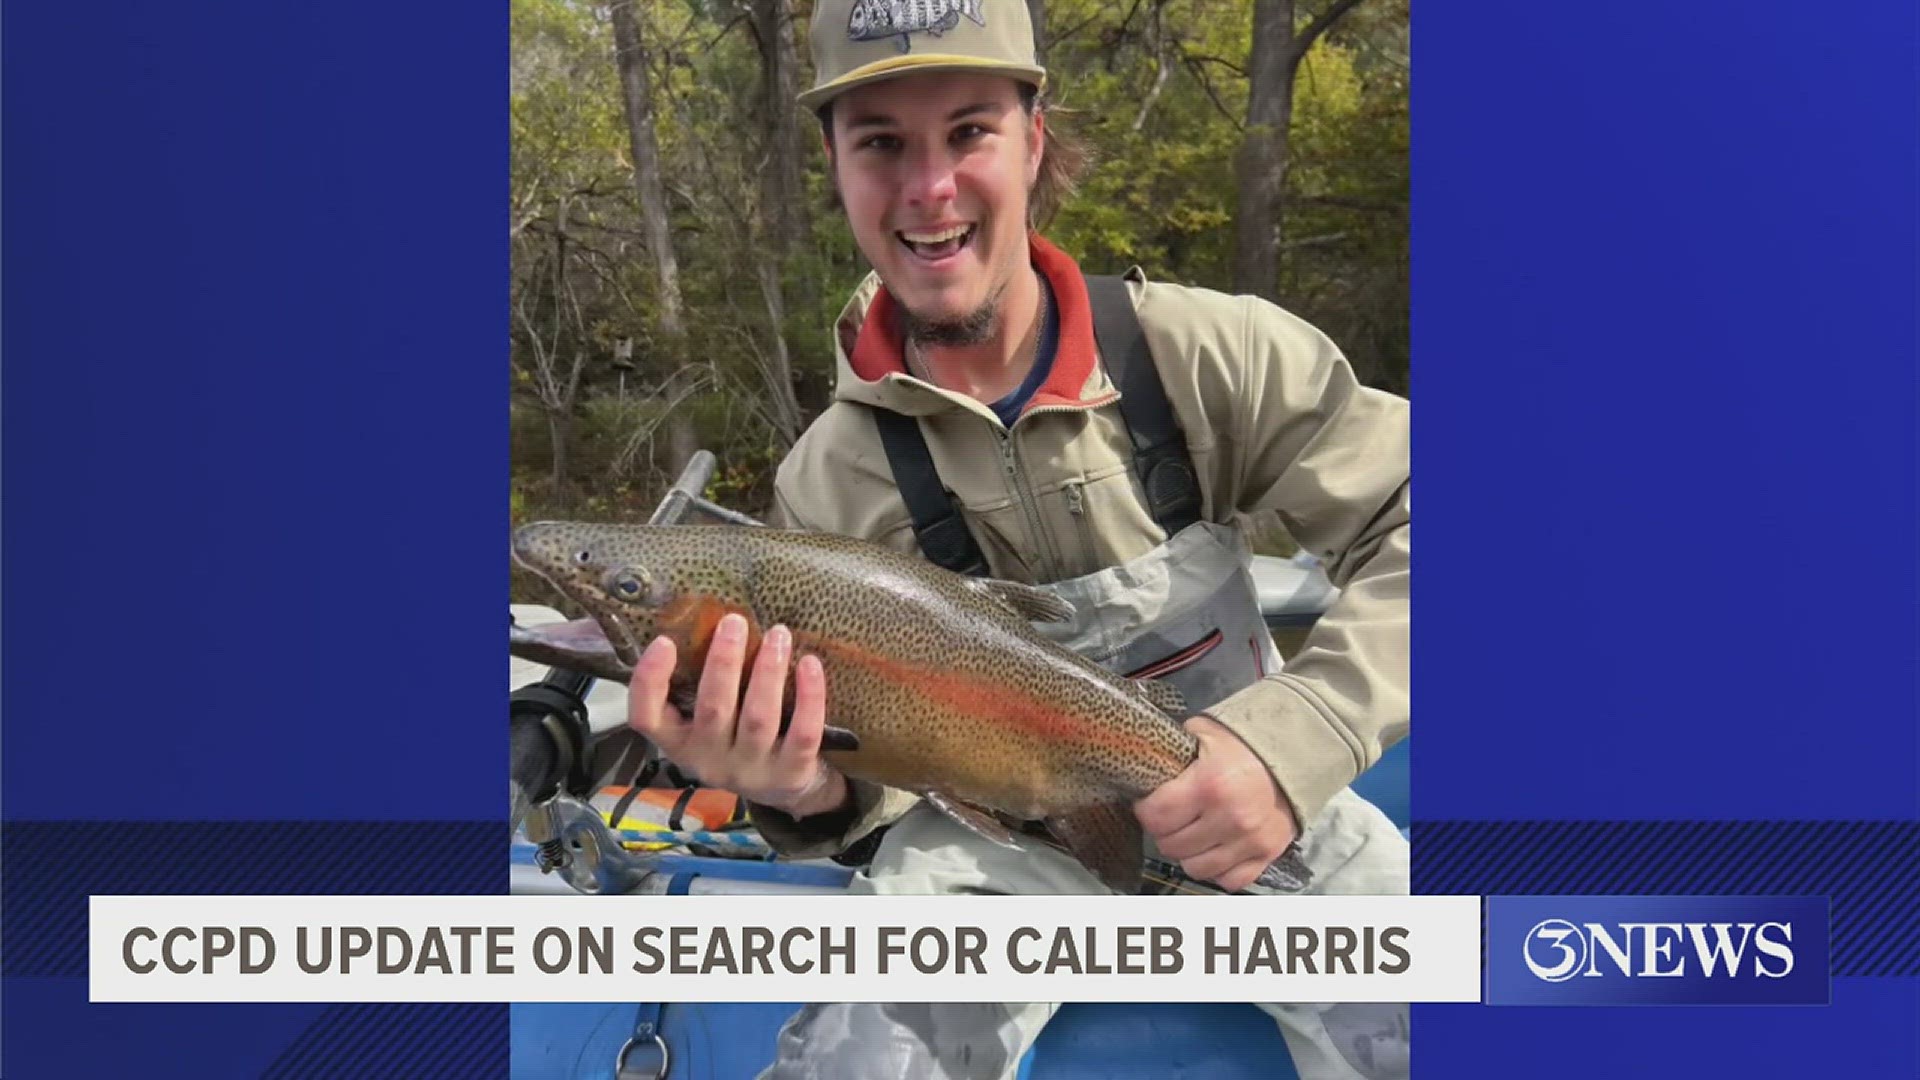 CCPD Assistant Chief Todd Green told 3NEWS that Caleb's roommates have been cleared as suspects in his disappearance.